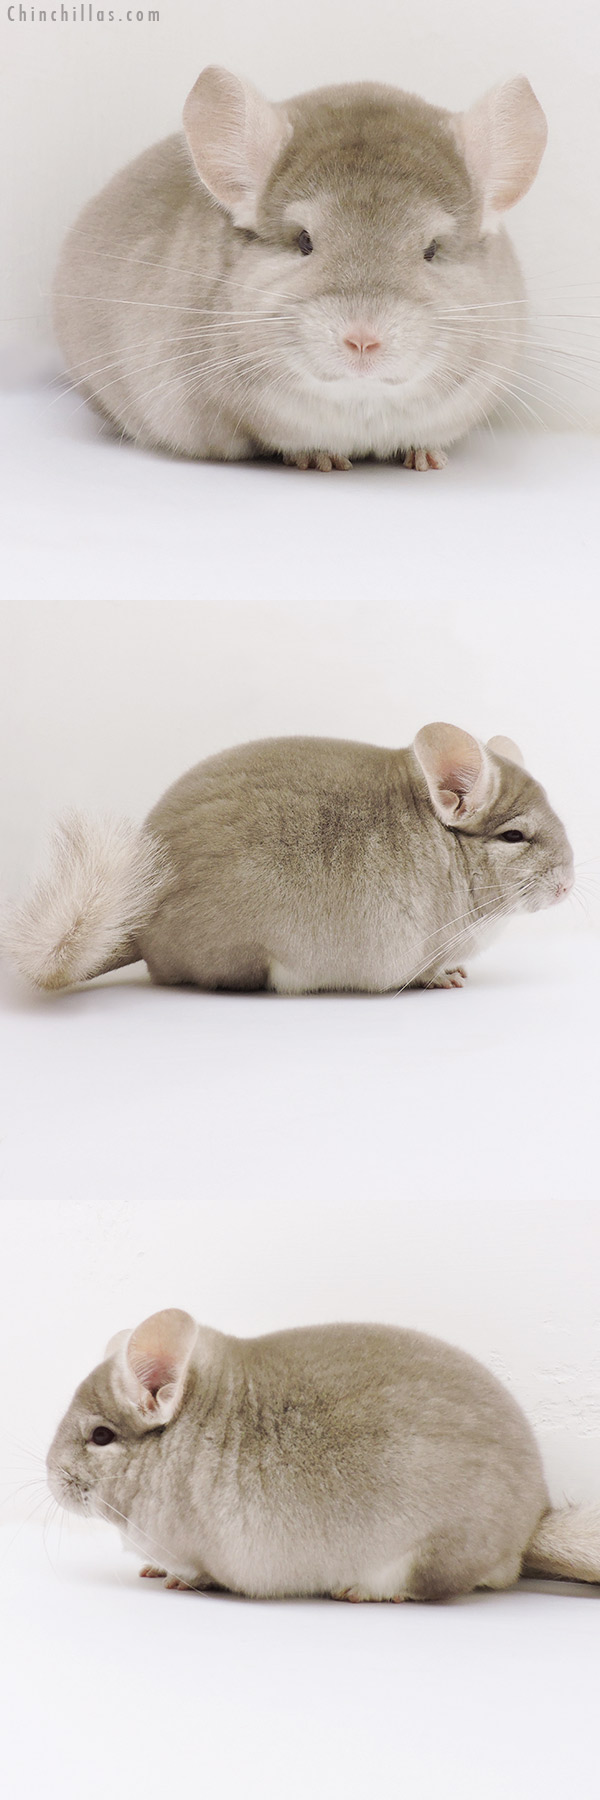 Chinchilla or related item offered for sale or export on Chinchillas.com - 17068 Blocky Show Quality Homo Beige Male Chinchilla